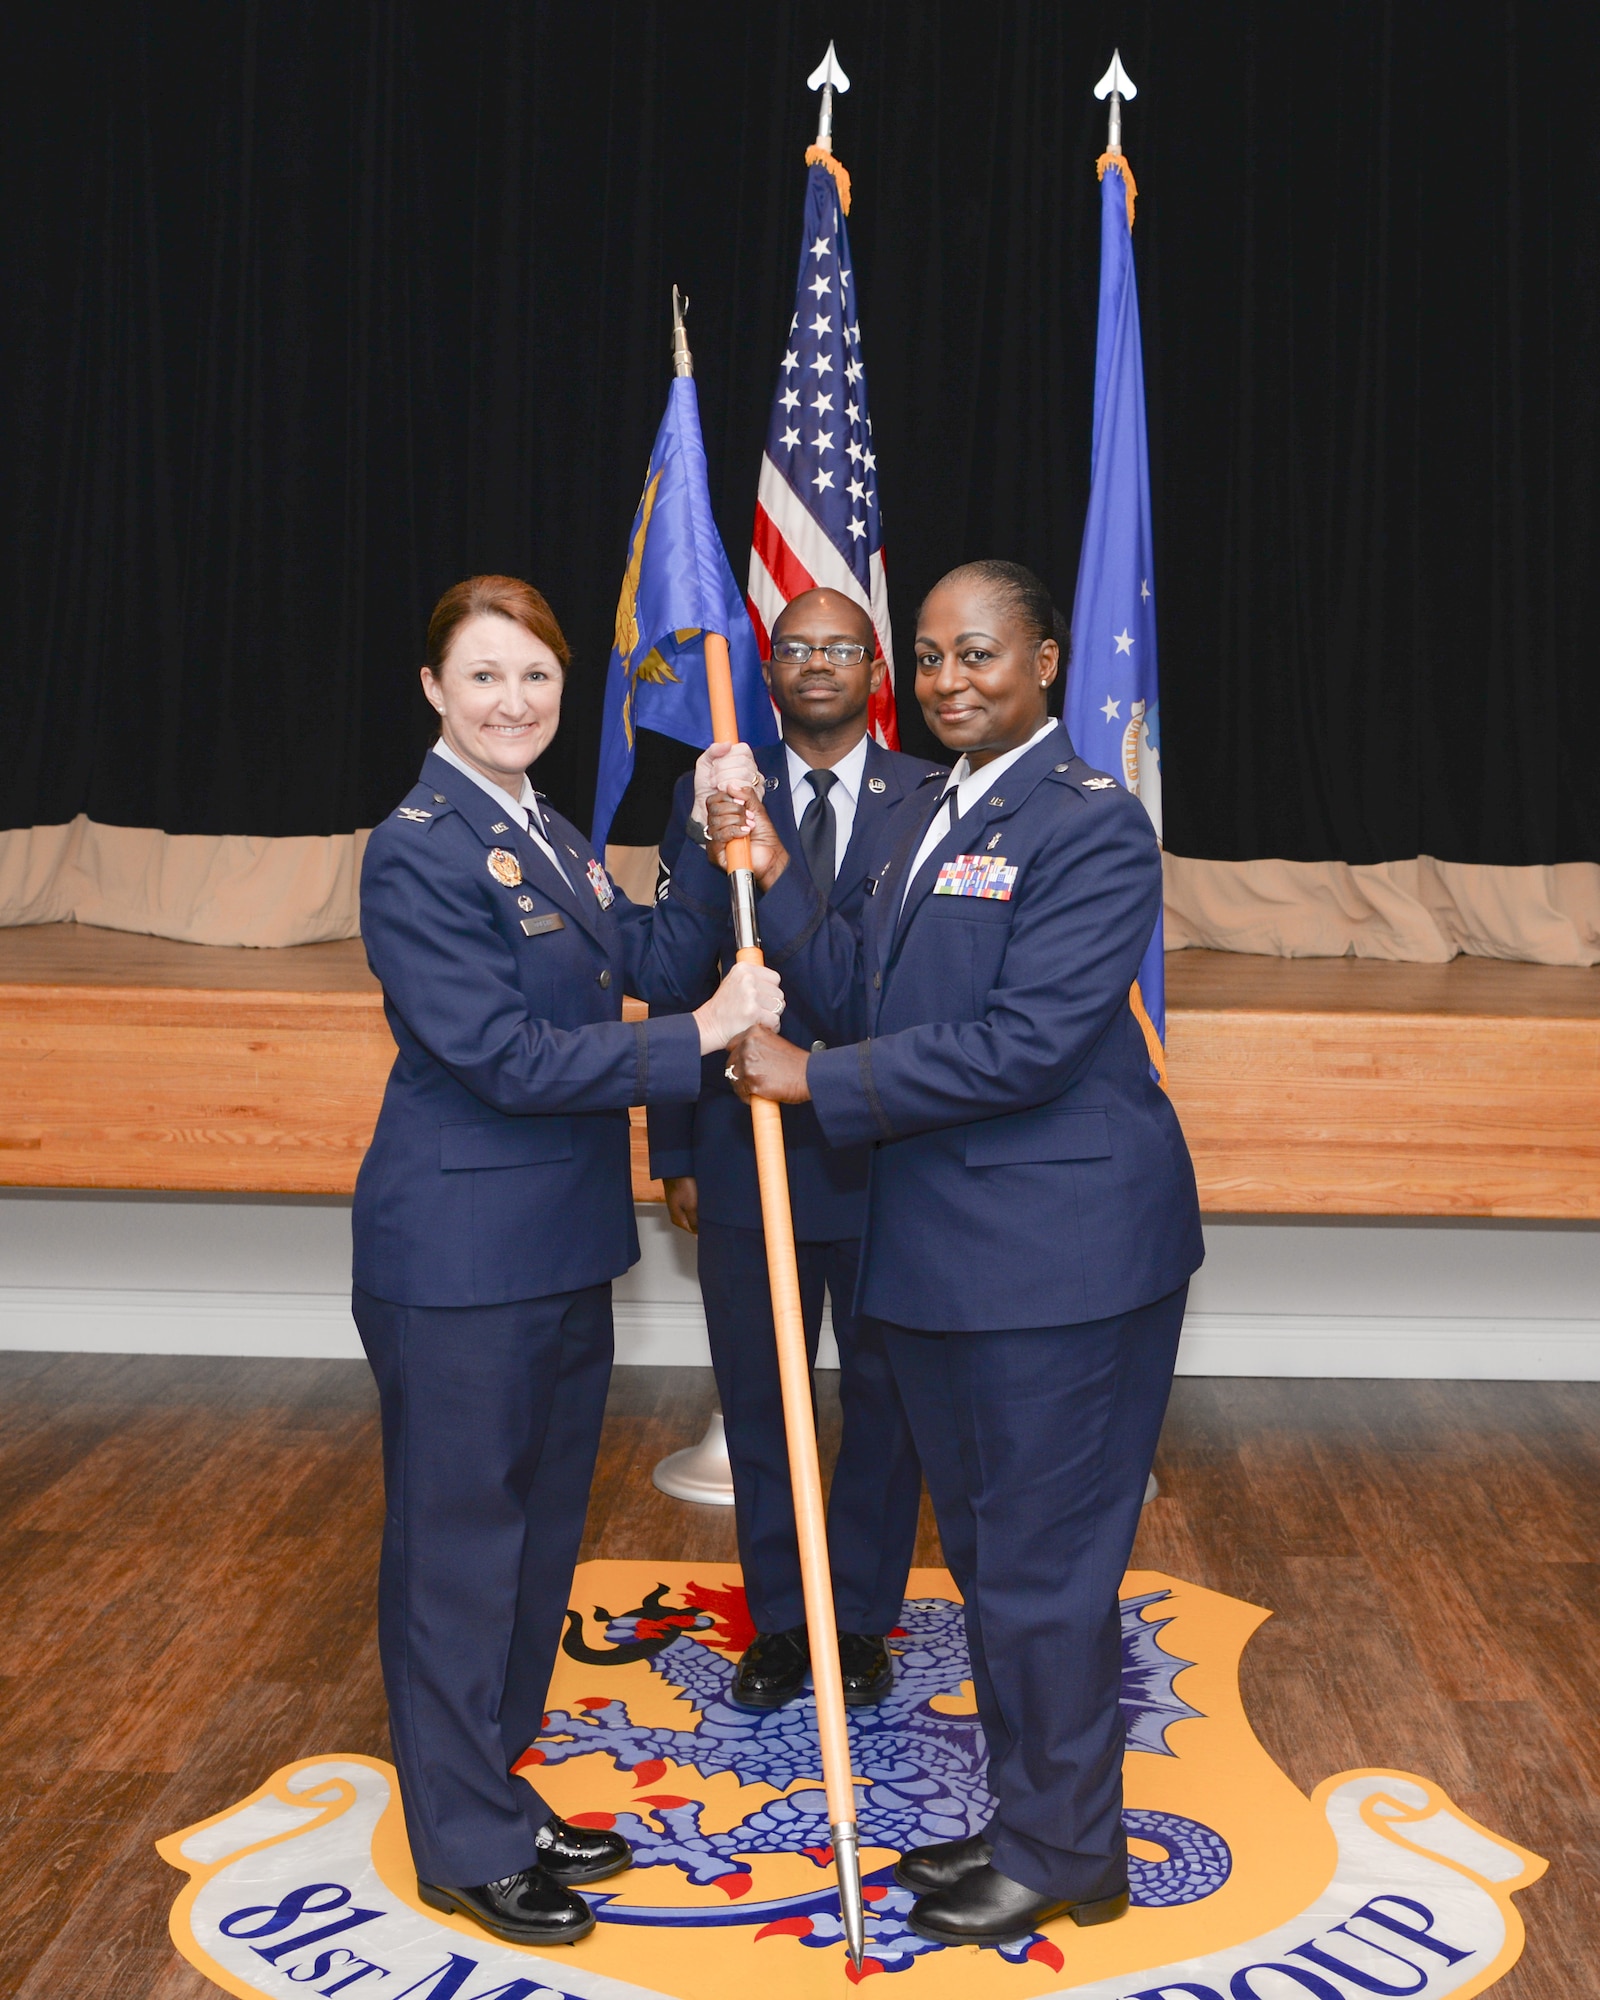 U.S. Air Force Col. Beatrice Dolihite, 81st Medical Group commander, gives the 81st Inpatient Operations Squadron guidon to Col. Mary Parker, incoming 81st IPTS commander, during the 81st IPTS change of command ceremony inside the Don Wylie Auditorium on Keesler Air Force Base, Mississippi, June 21, 2019.